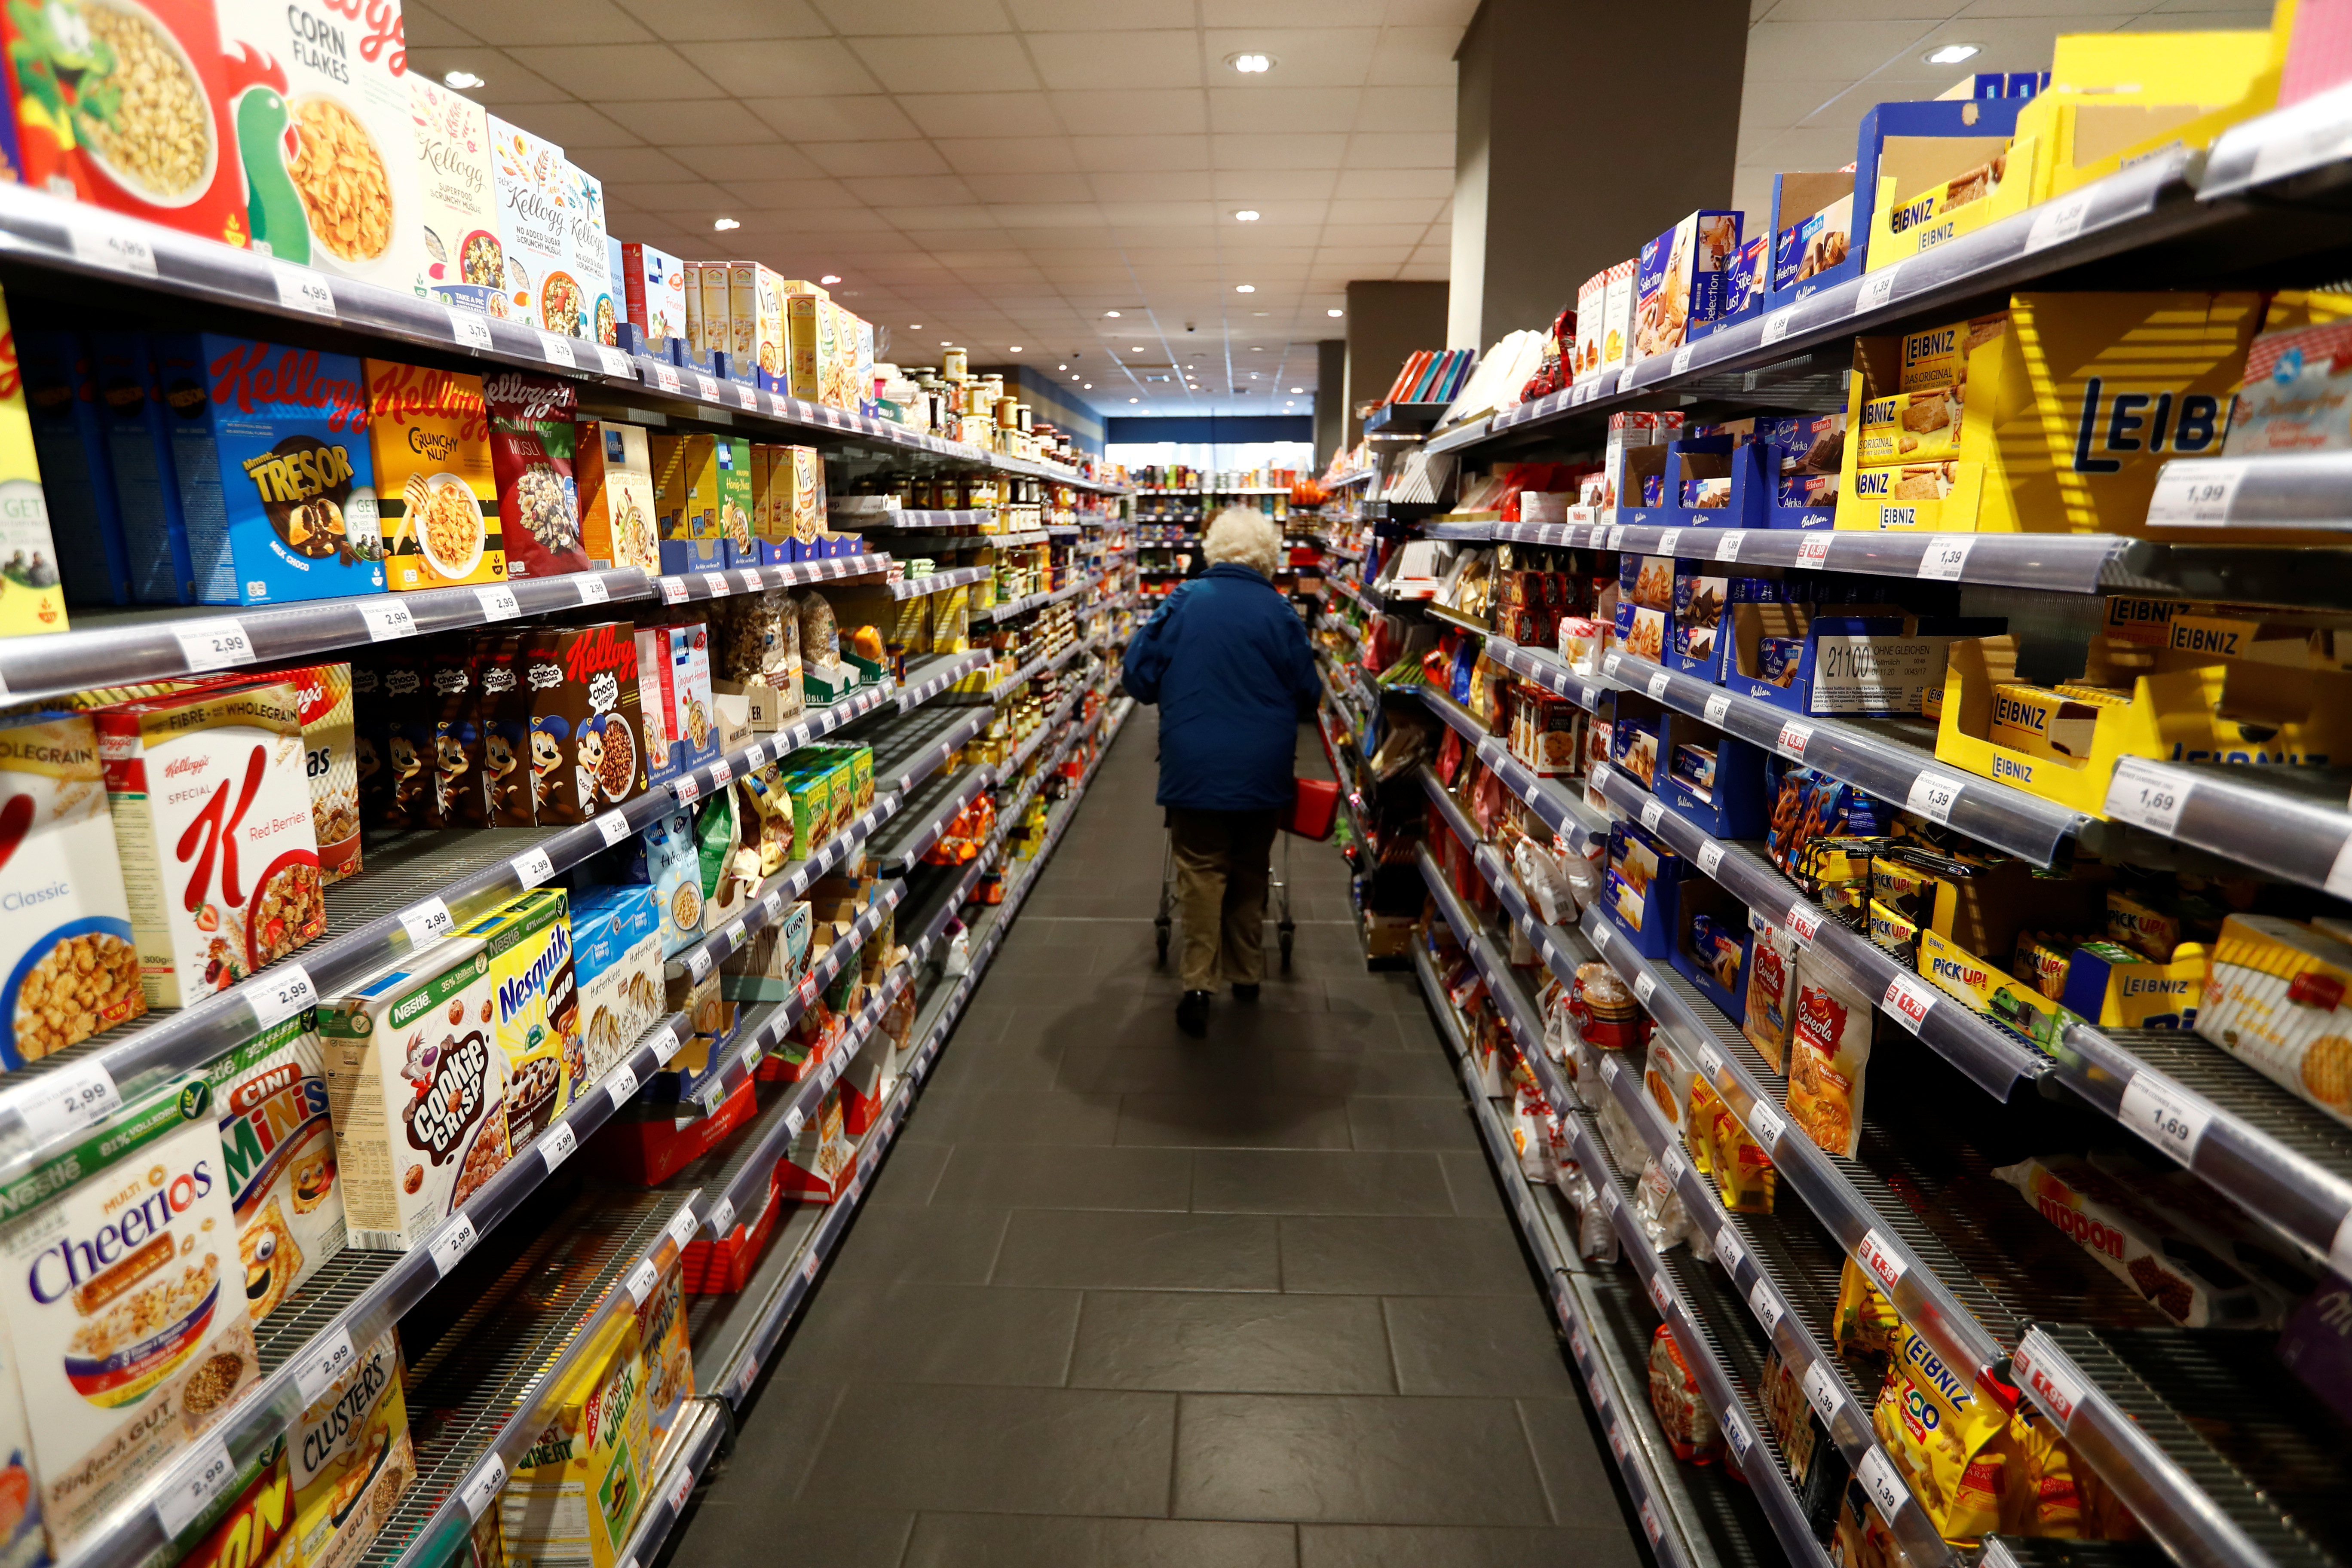 Full shelves with groceries are pictured in a supermarket during the spread of the coronavirus disease (COVID-19) in Berlin